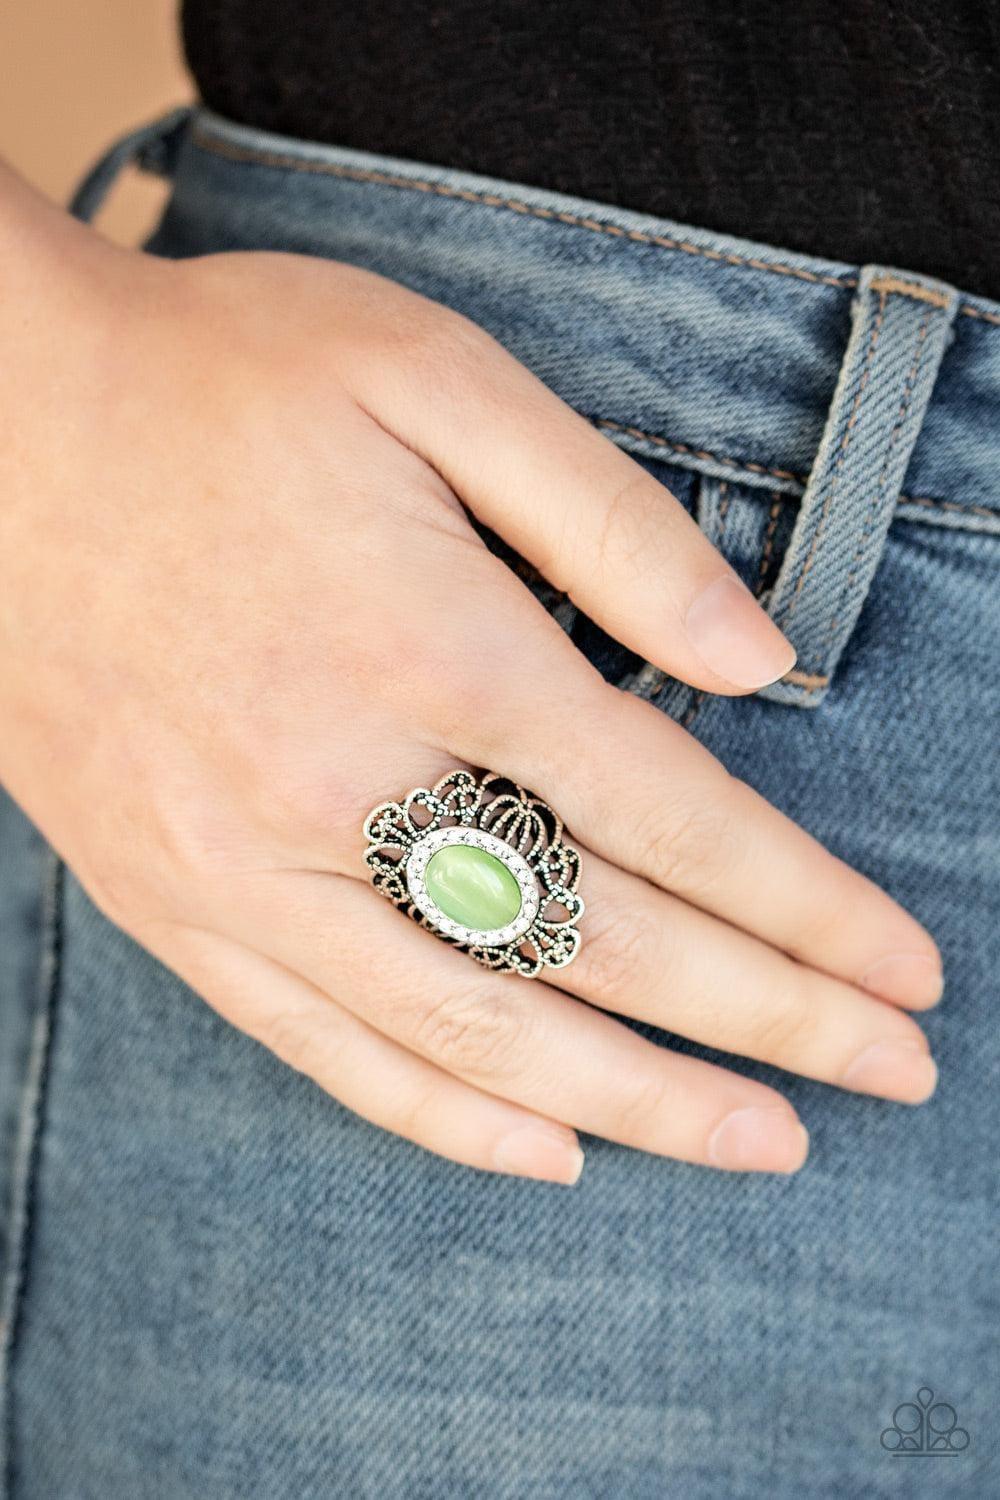 Paparazzi Accessories - Dashingly Dewy - Green Ring - Bling by JessieK